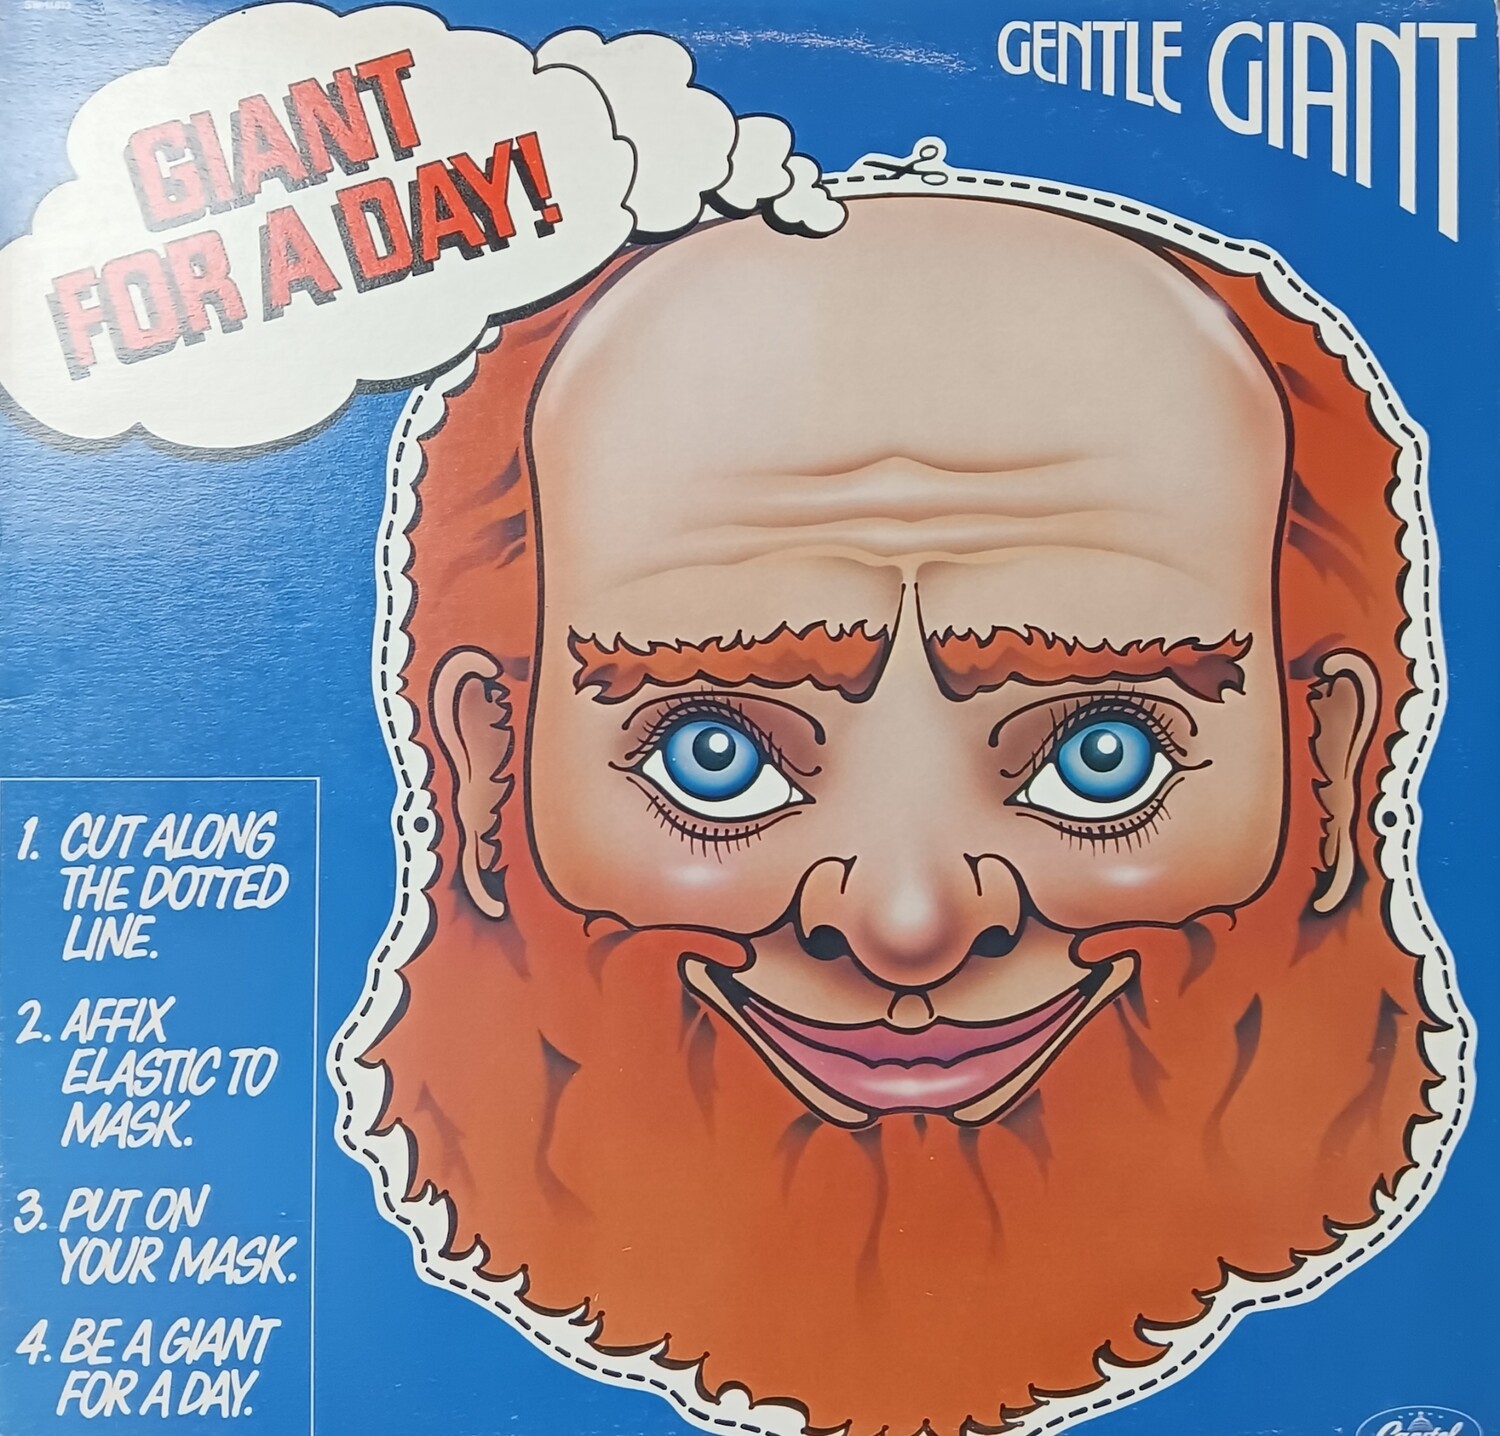 Gentle Giant - Giant for a day